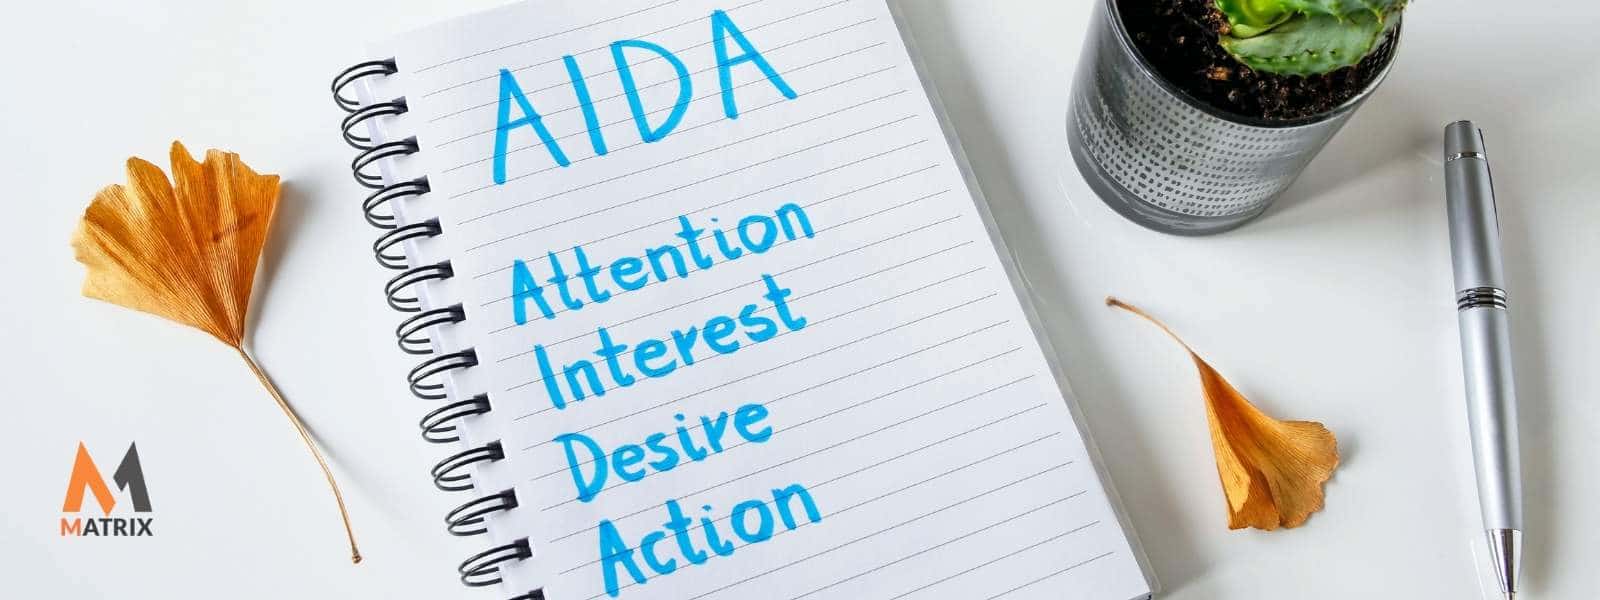 What does AIDA stand for?